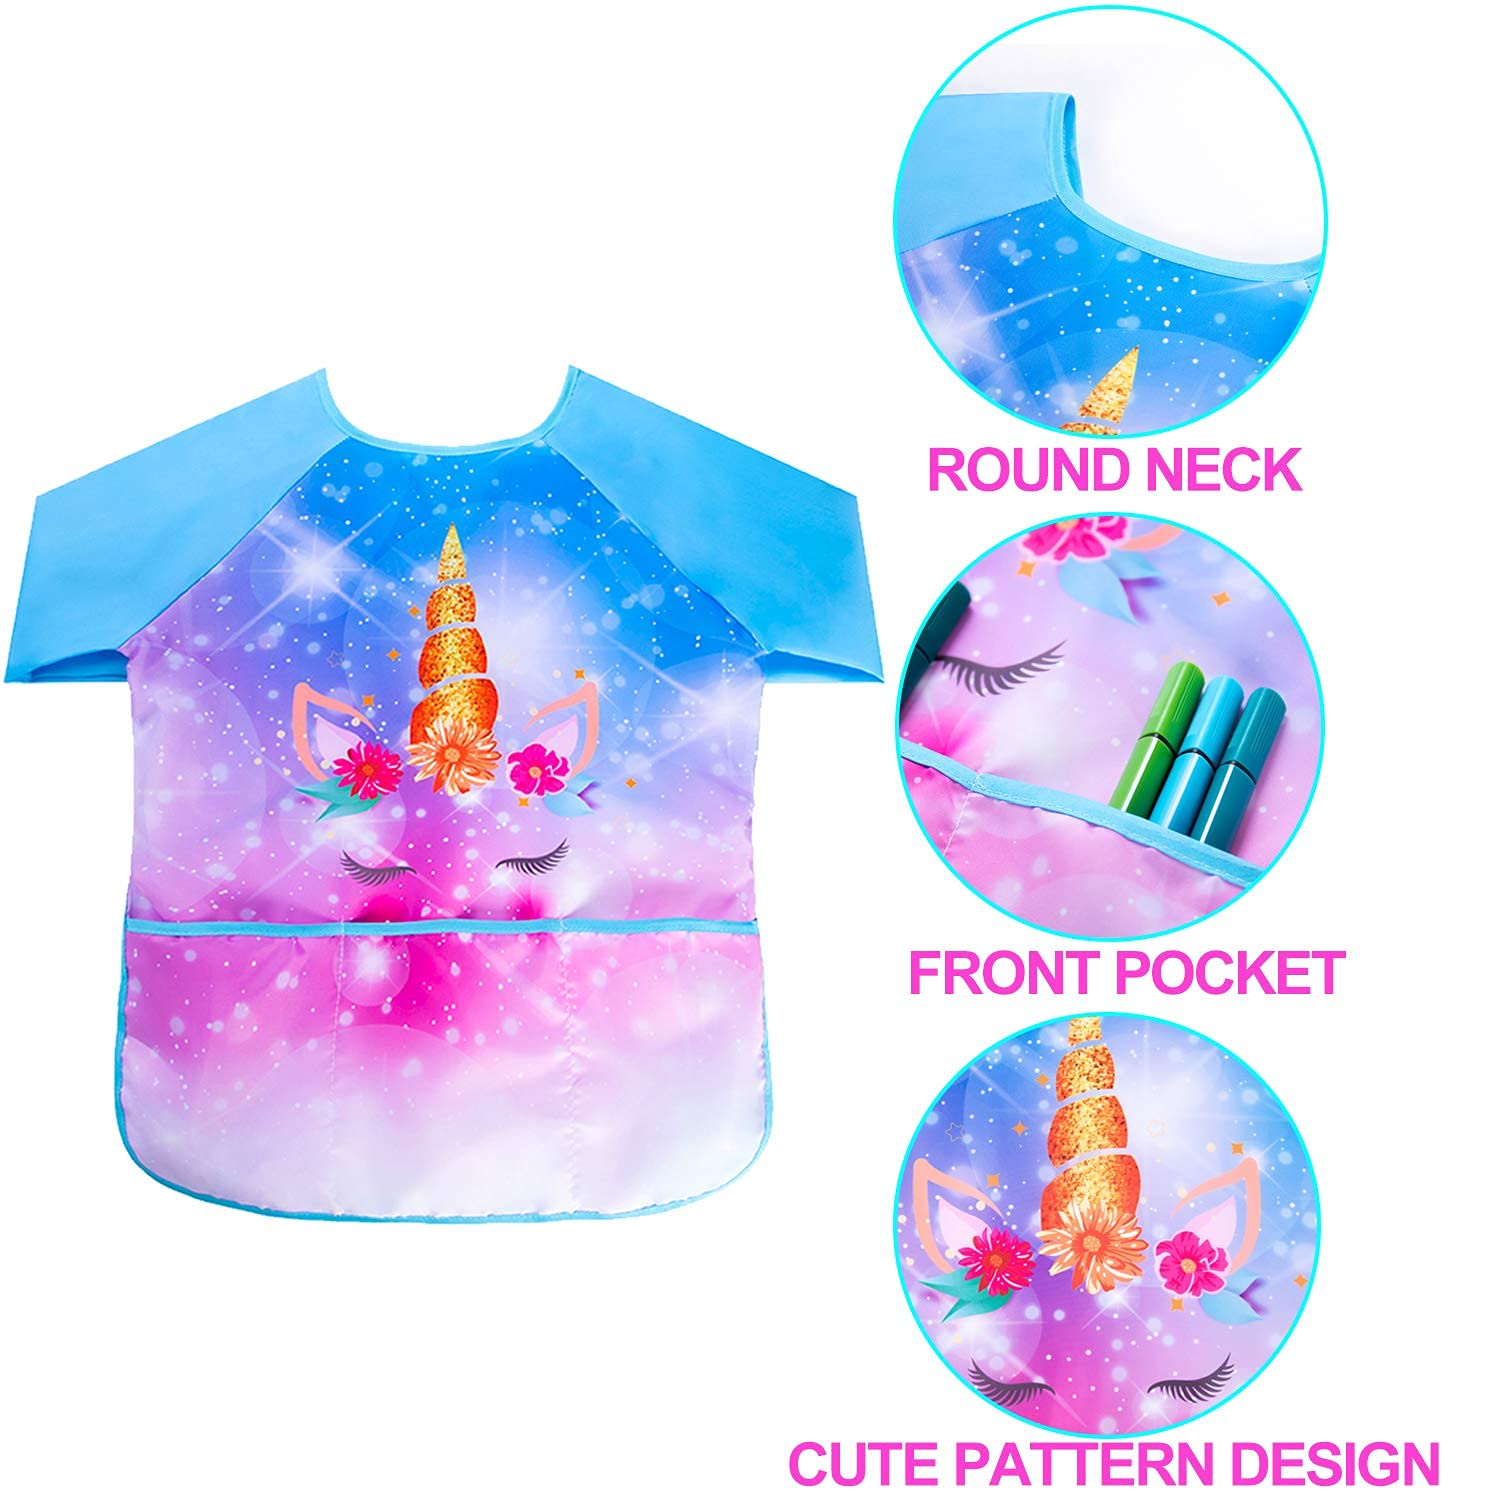 Fiodrimy Kids Art Smock Toddler Smock Waterproof Artist Painting Aprons Long Sleeve with 3 Pockets for Age 2-7 Years